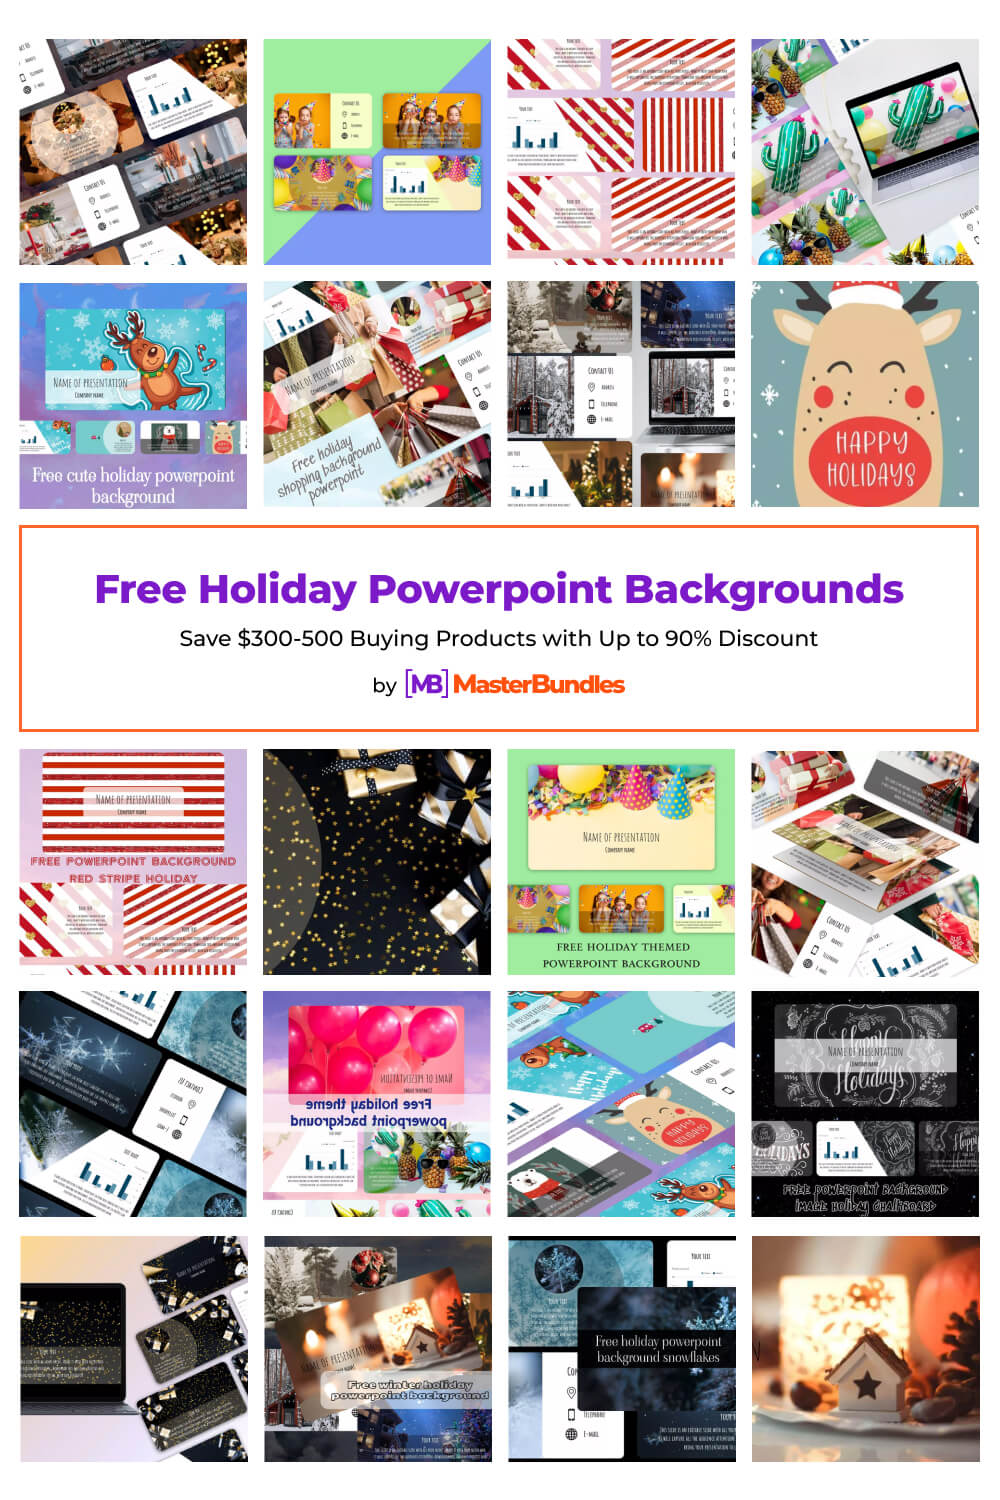 free holiday powerpoint backgrounds pinterest image.